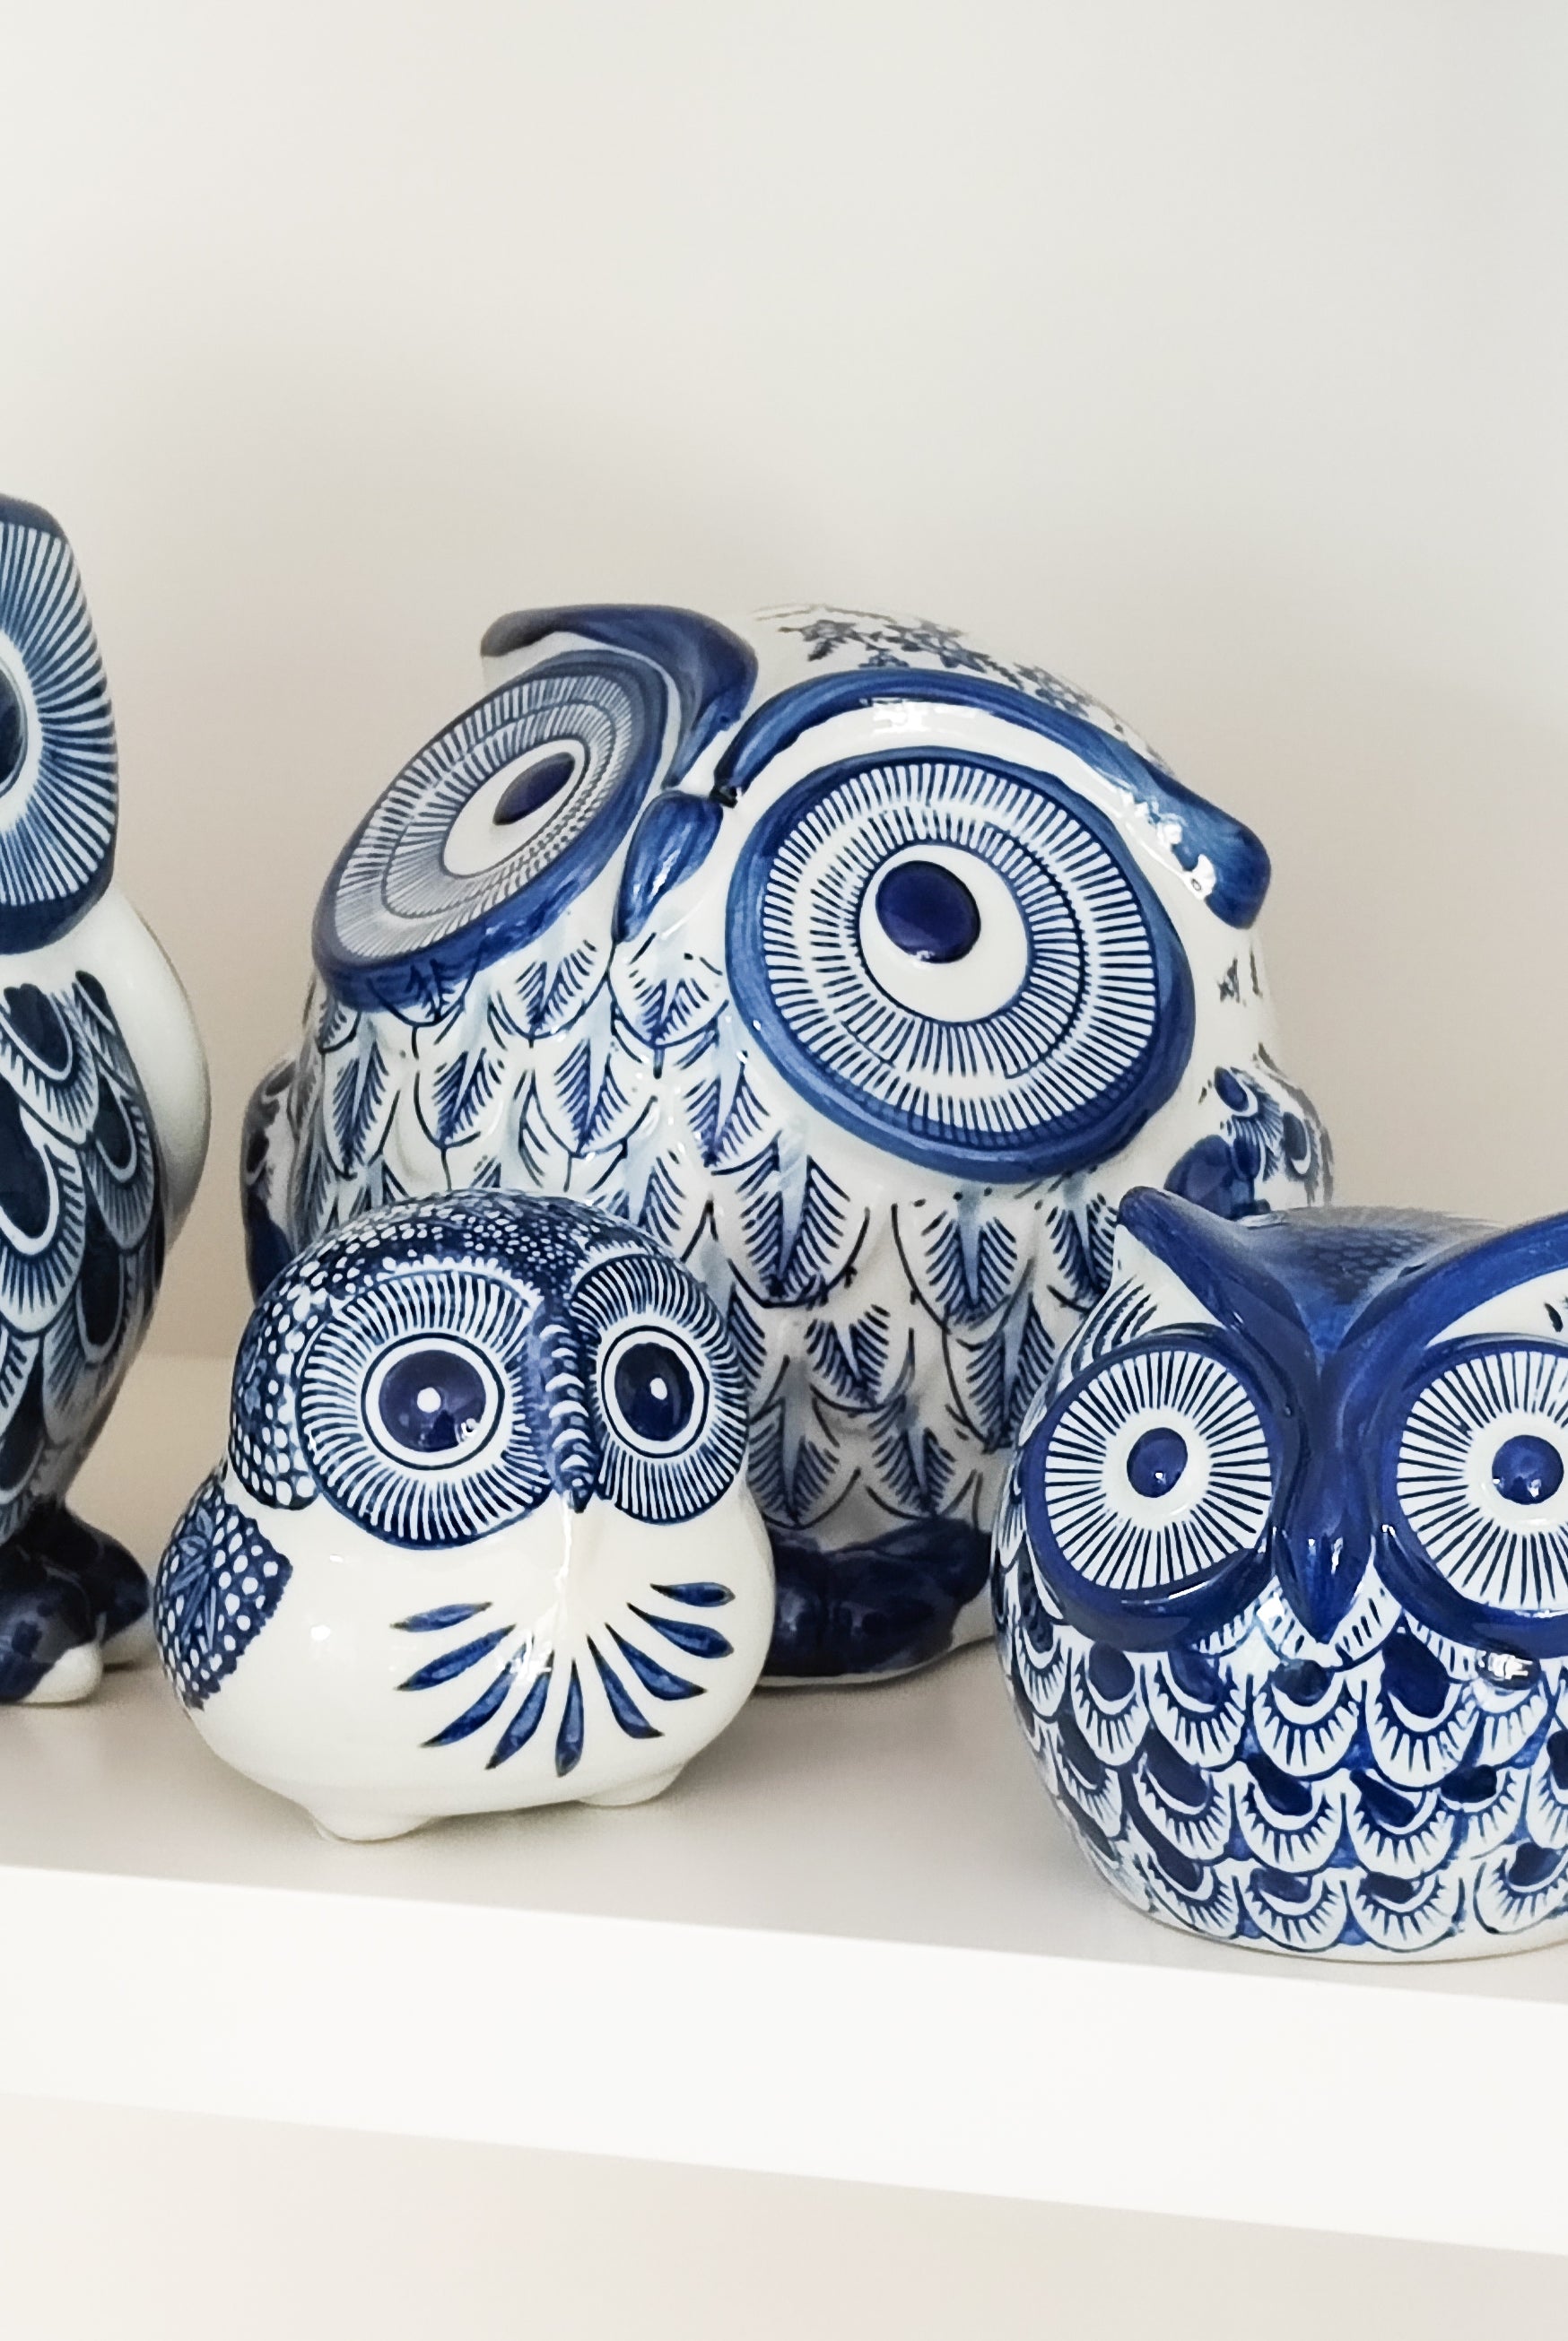 MAGPIE HOME Mummy Ceramic Owl - Magpie Home - [product type] - Magpie Style